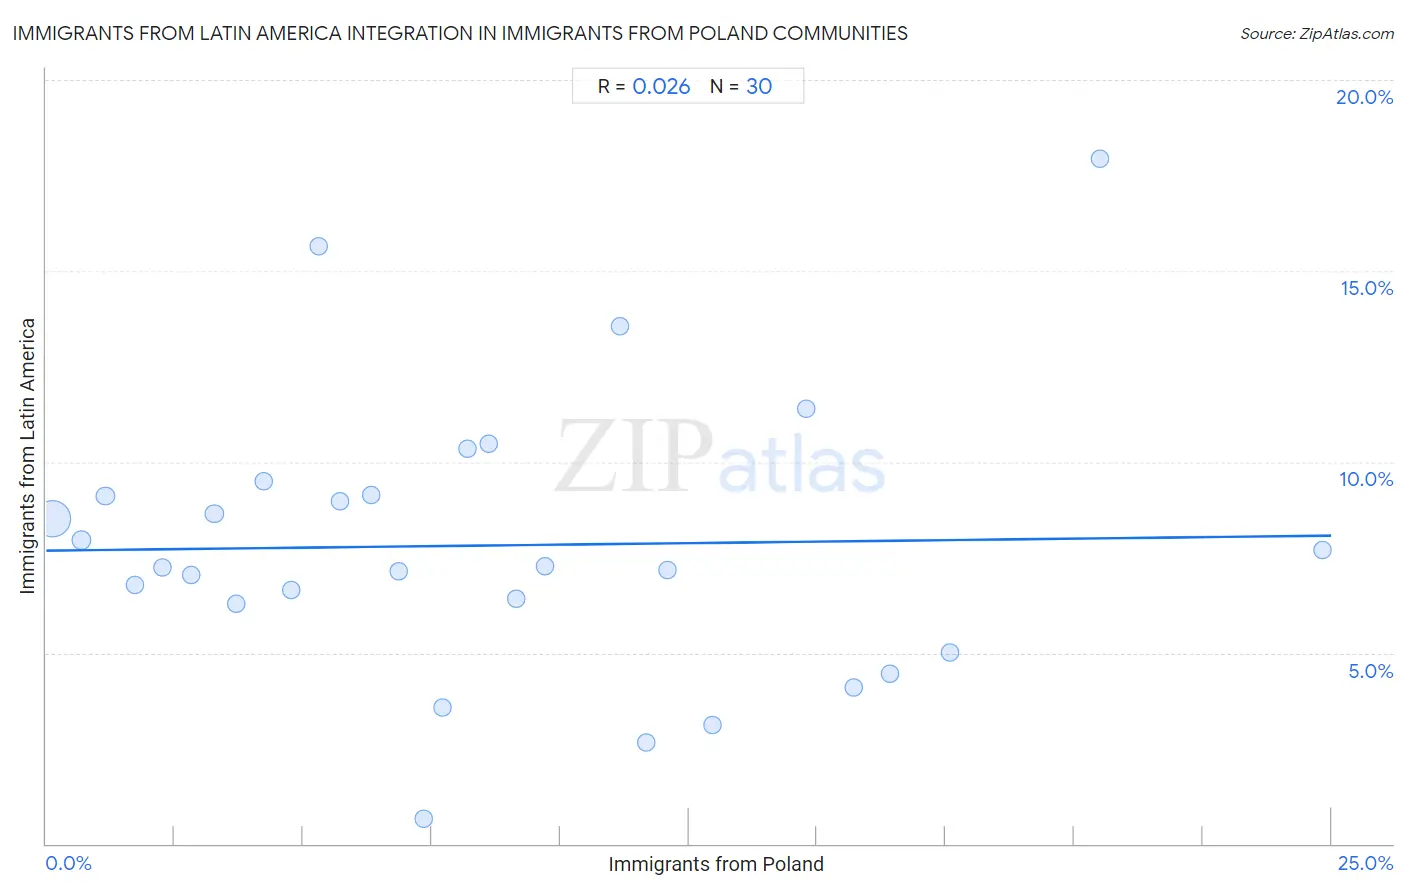 Immigrants from Poland Integration in Immigrants from Latin America Communities